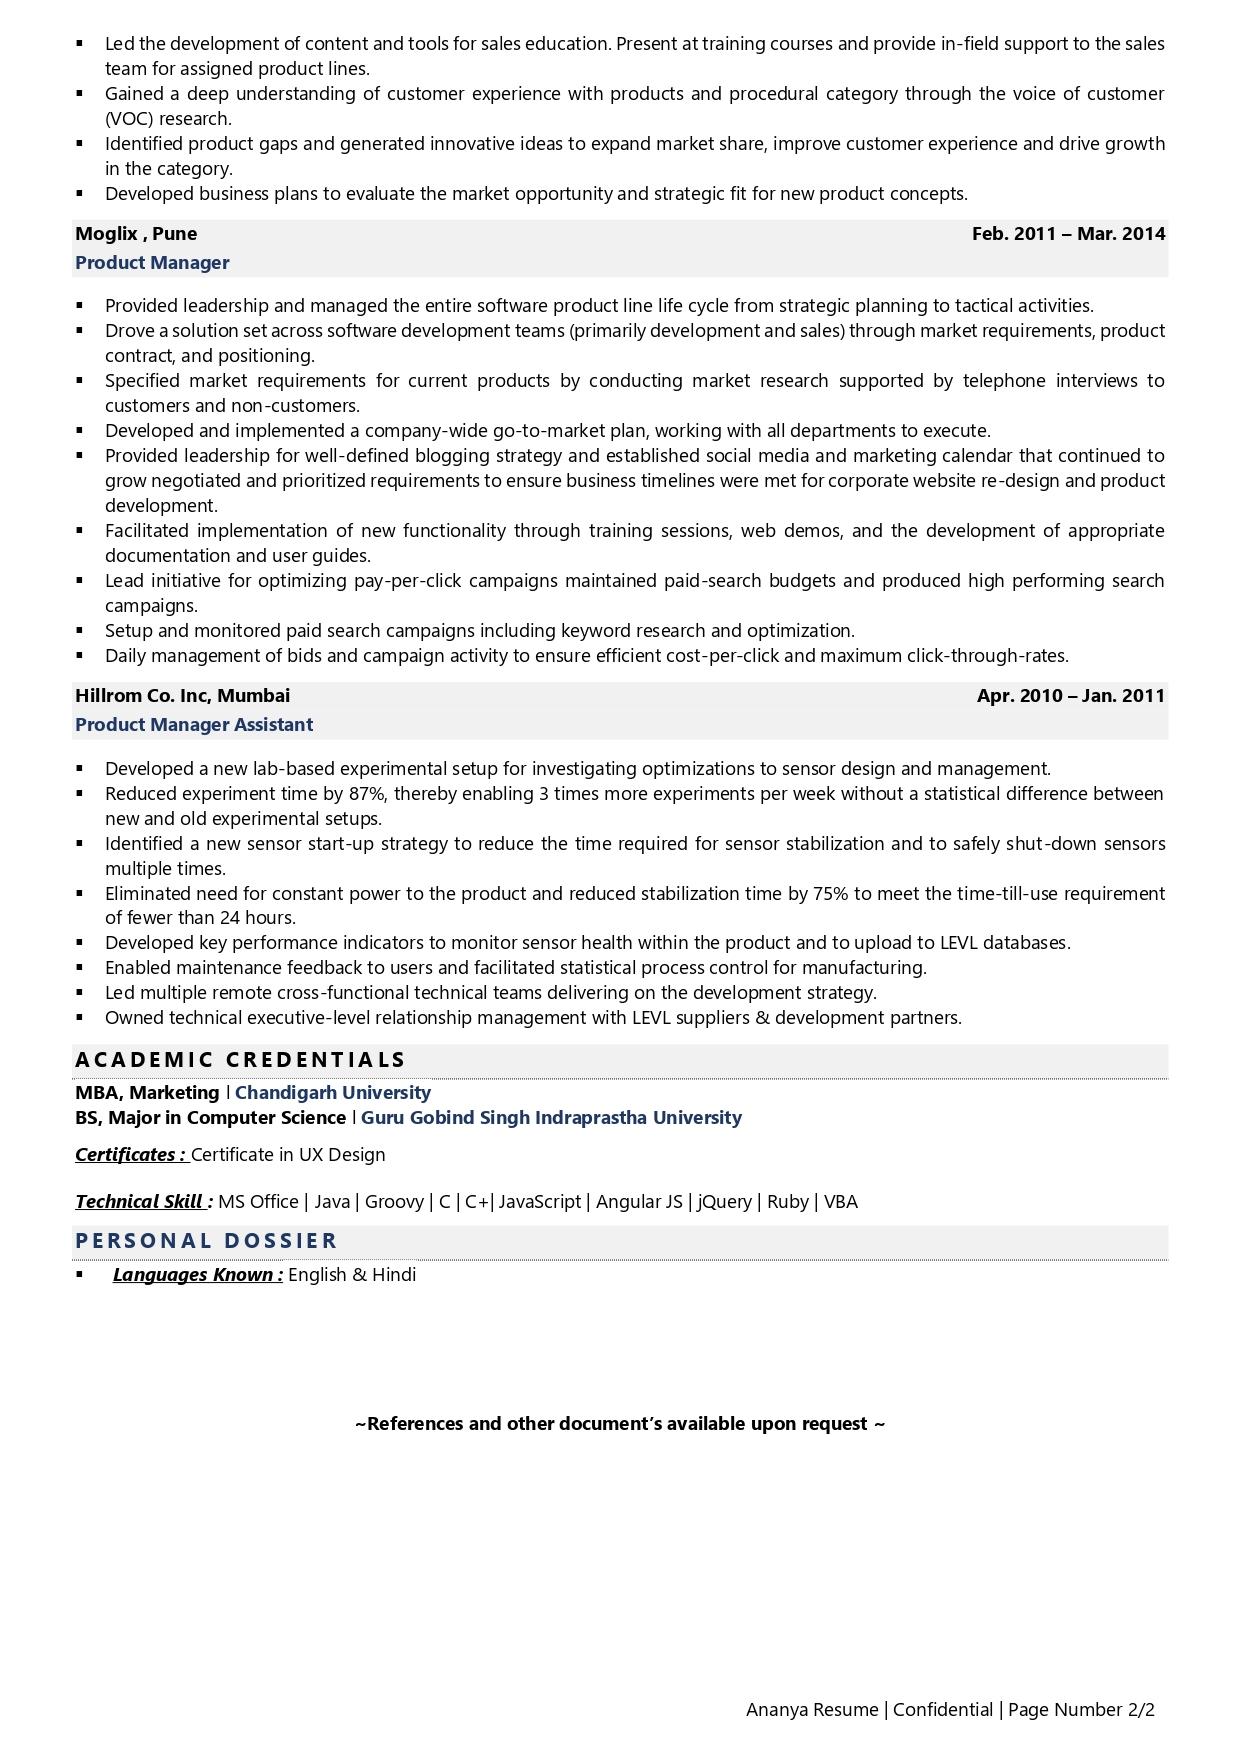 IT Project Manager - Resume Example & Template